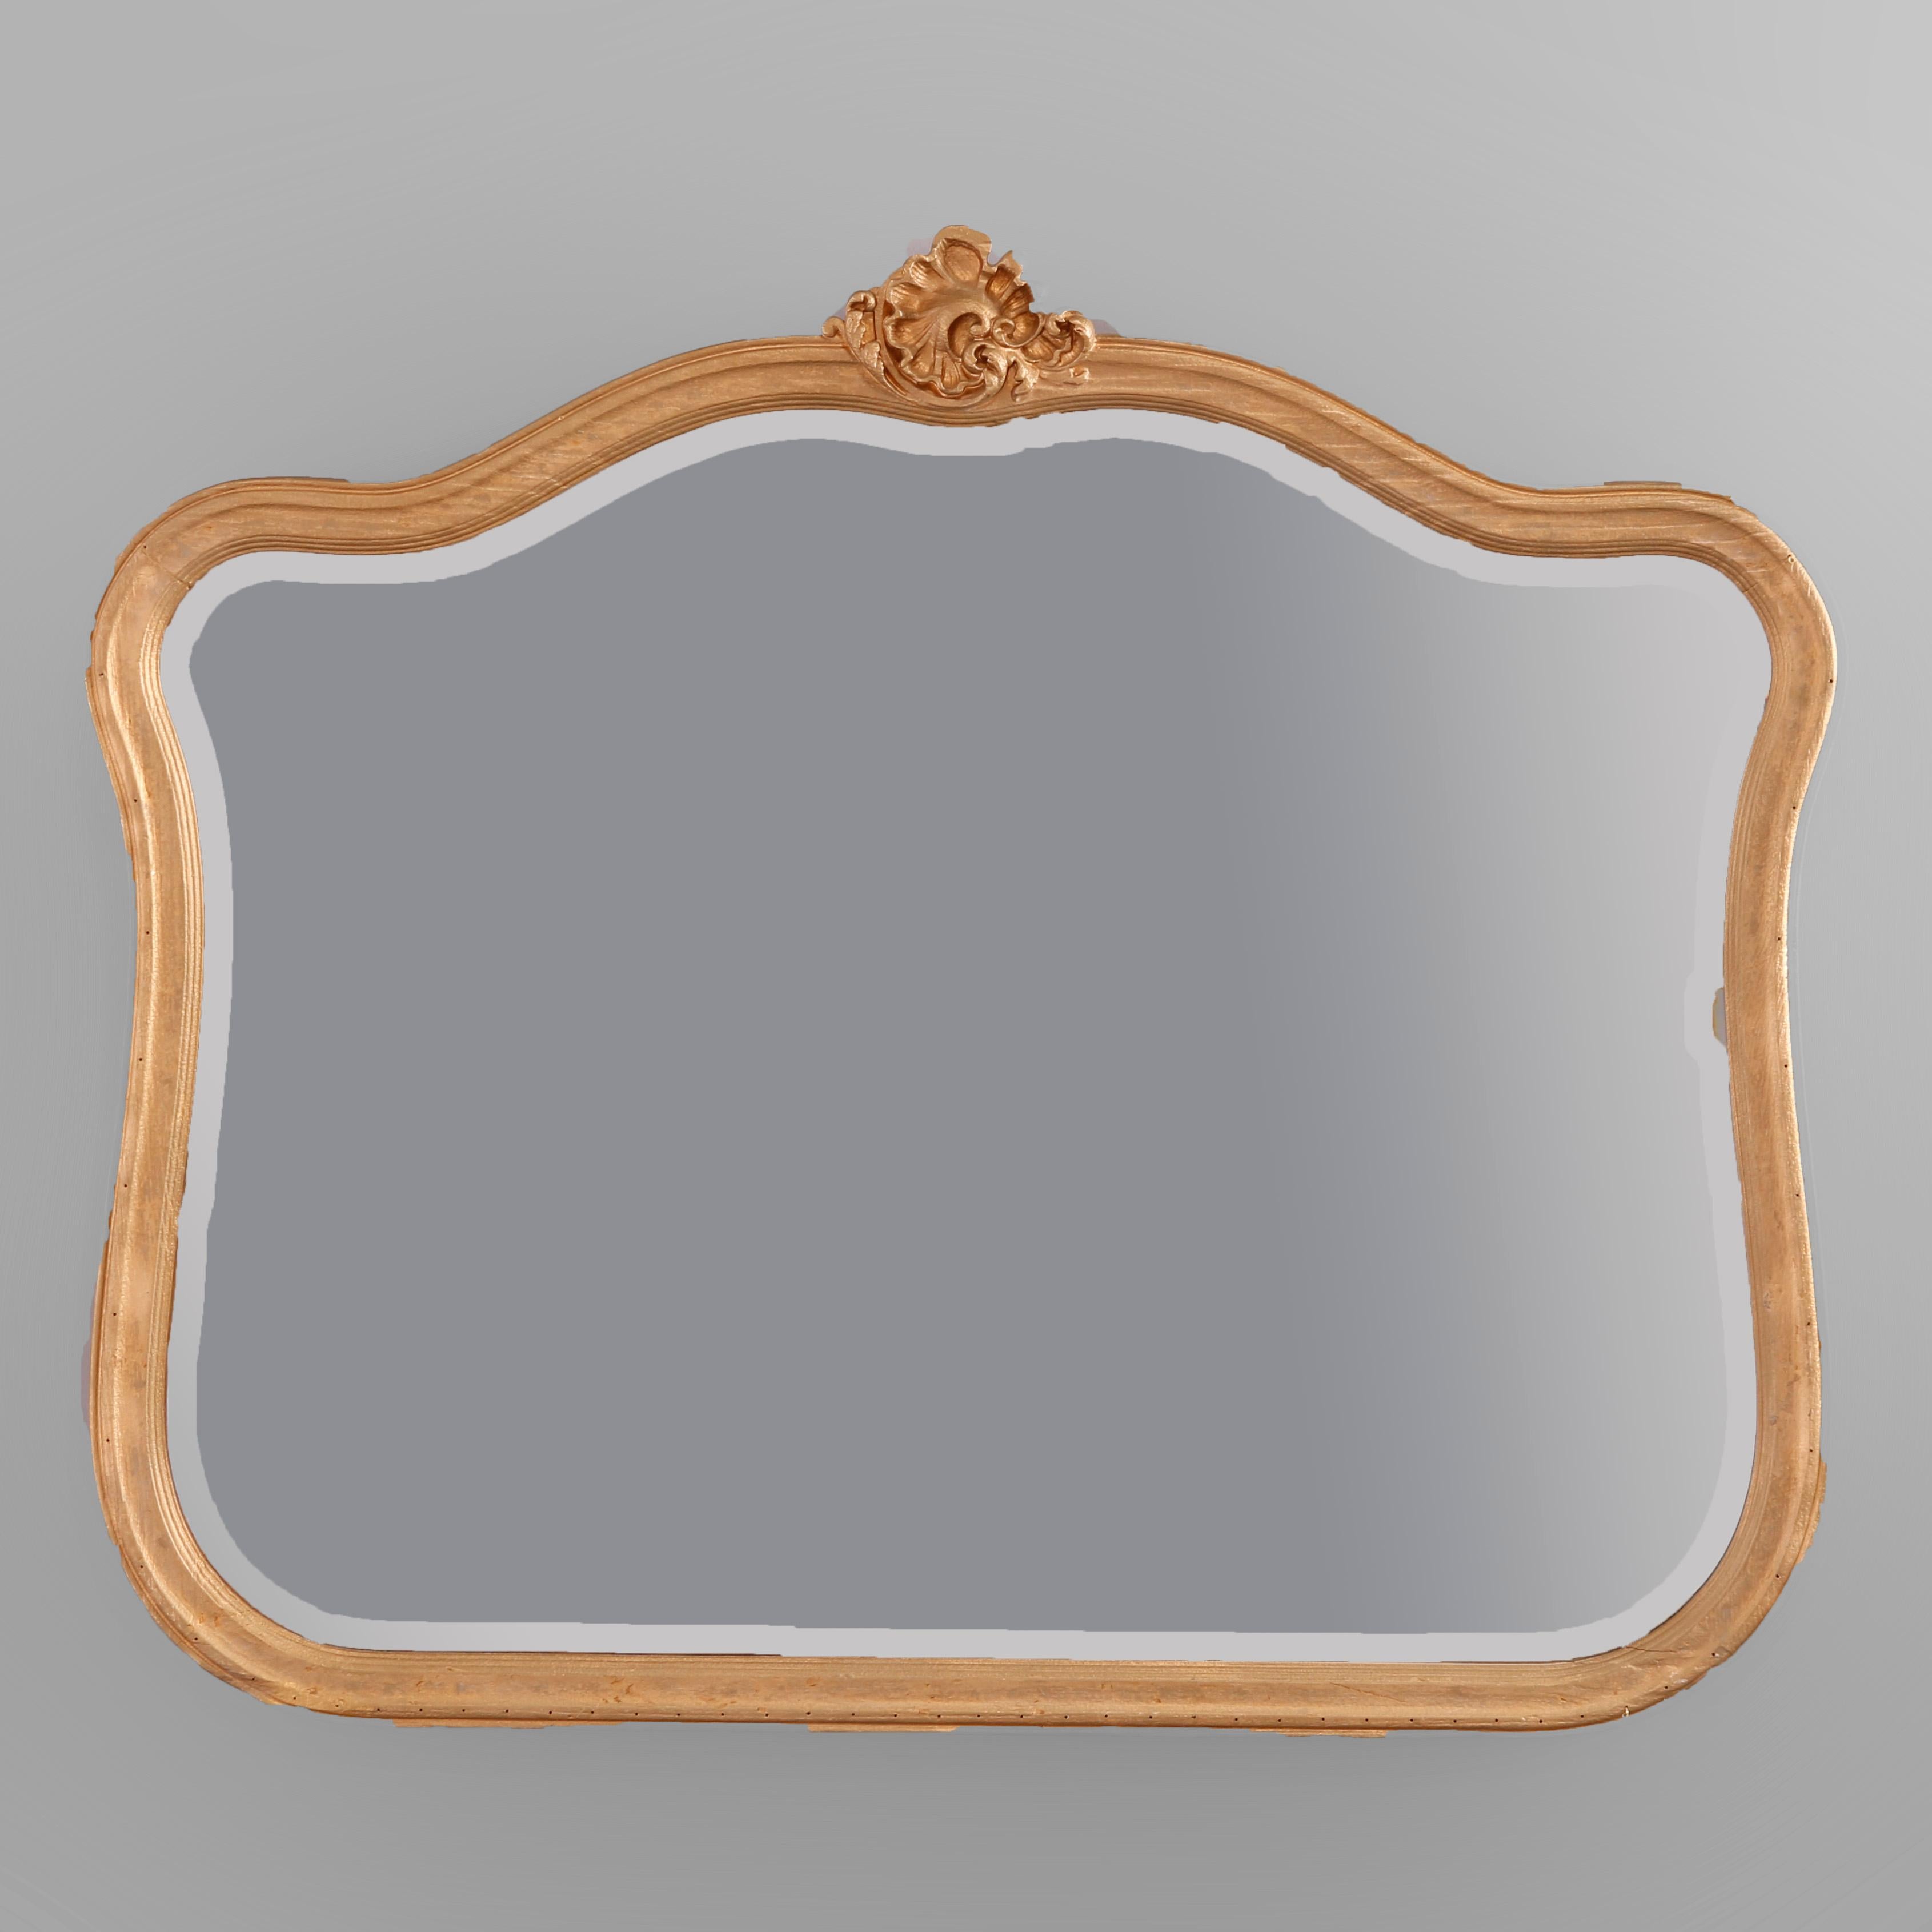 A French Rococo style wall mirror offers shaped form with giltwood frame having gadroon cartouche and housing beveled mirror, 20th century

Measures - 35.25'' H x 40.75'' W x 2.25'' D.

Catalogue Note: Ask about DISCOUNTED DELIVERY RATES available